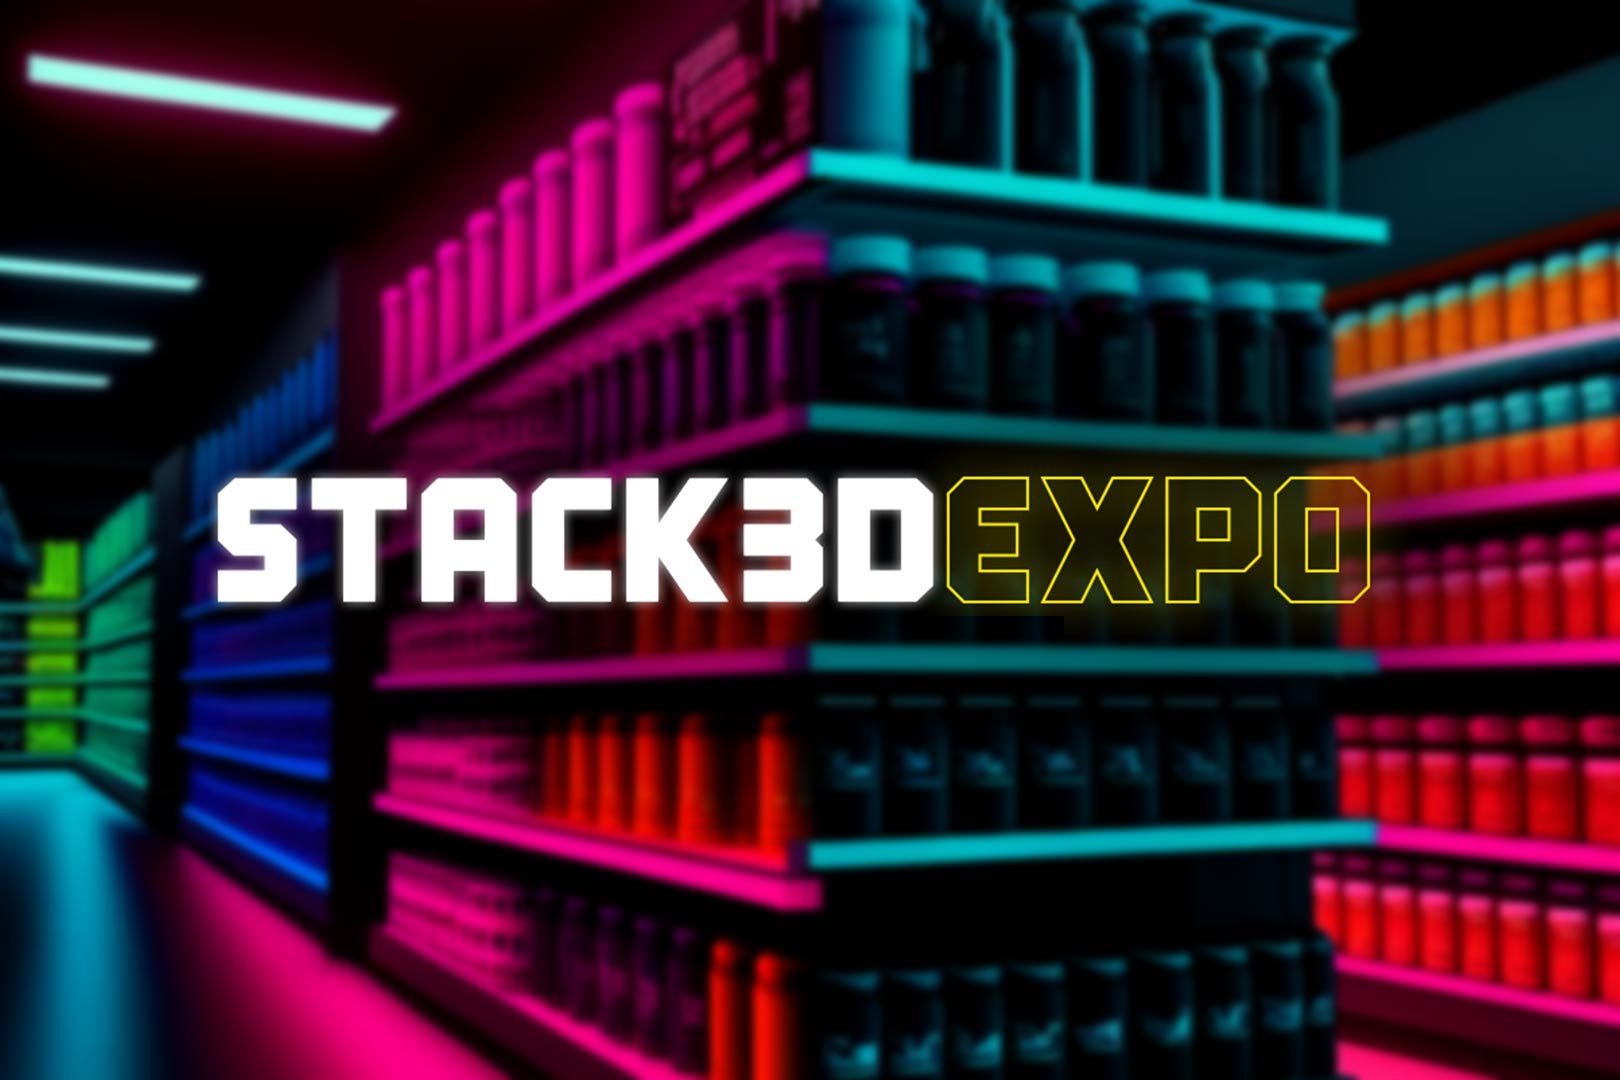 Stack3d Expo 2023 Announcement